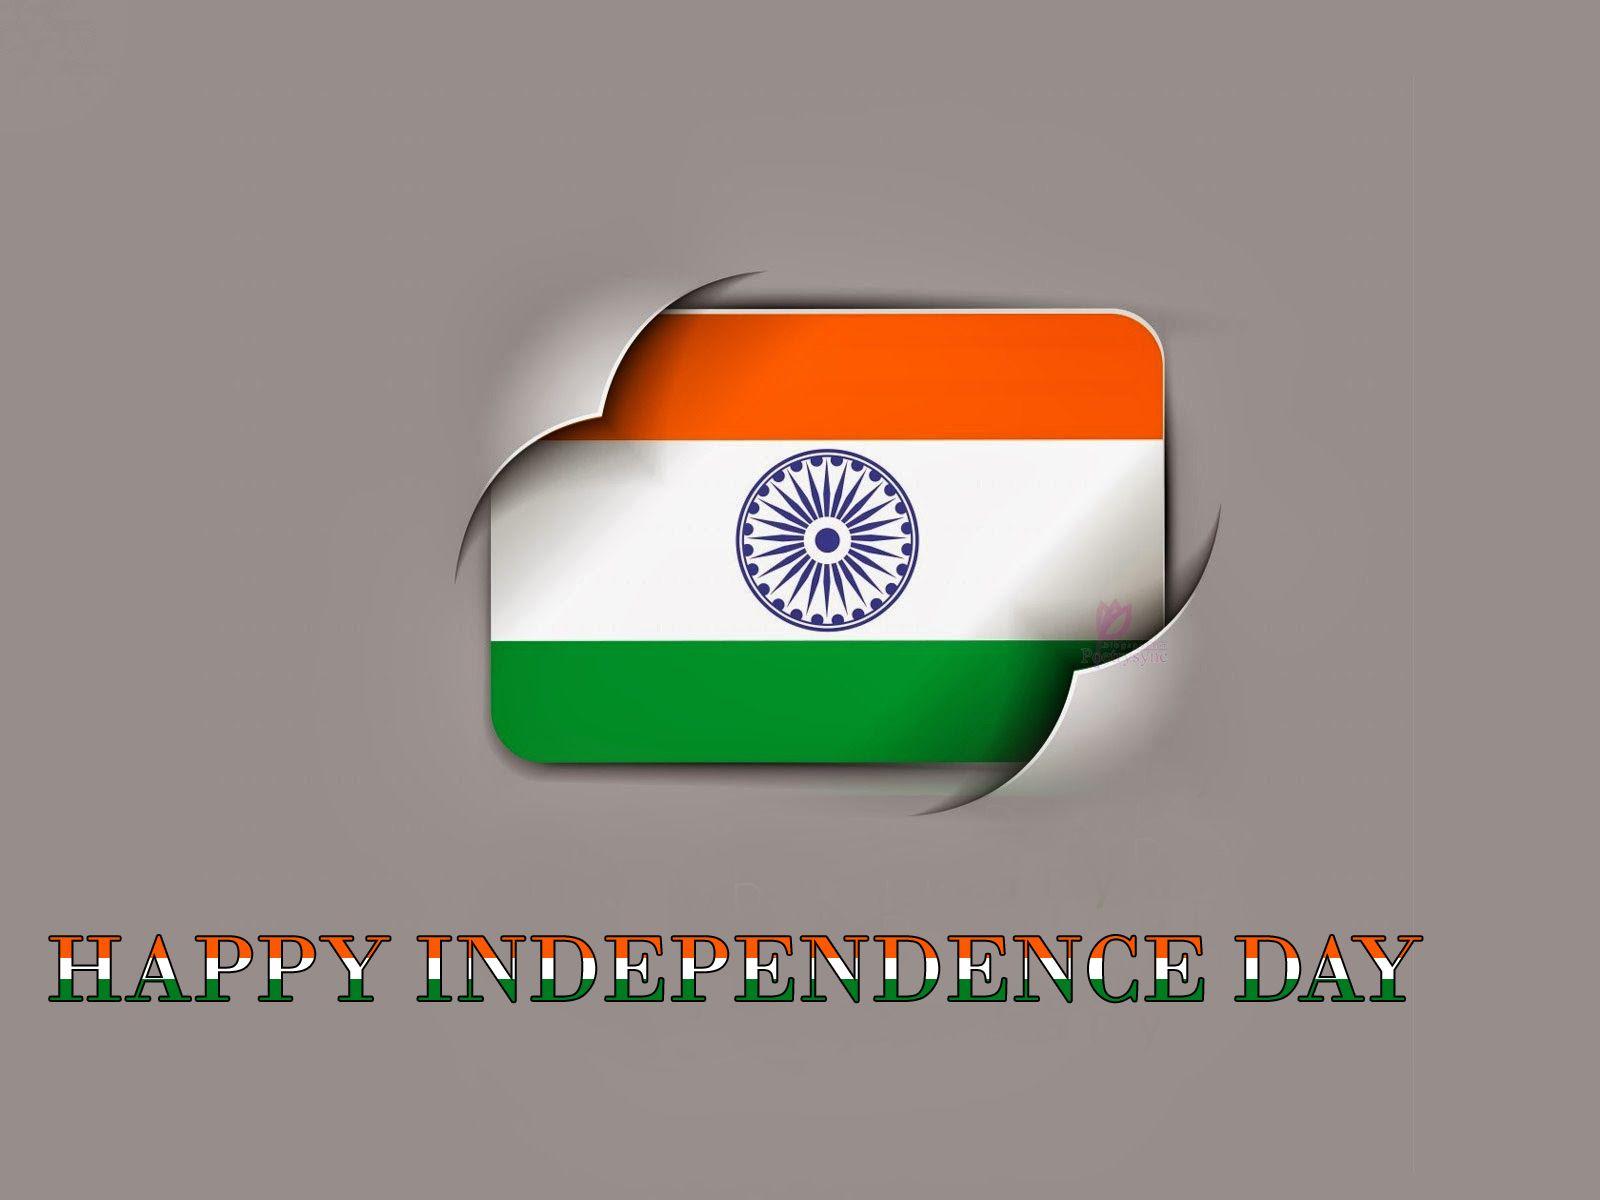 Indian Flag HD Wallpaper on Independence Day